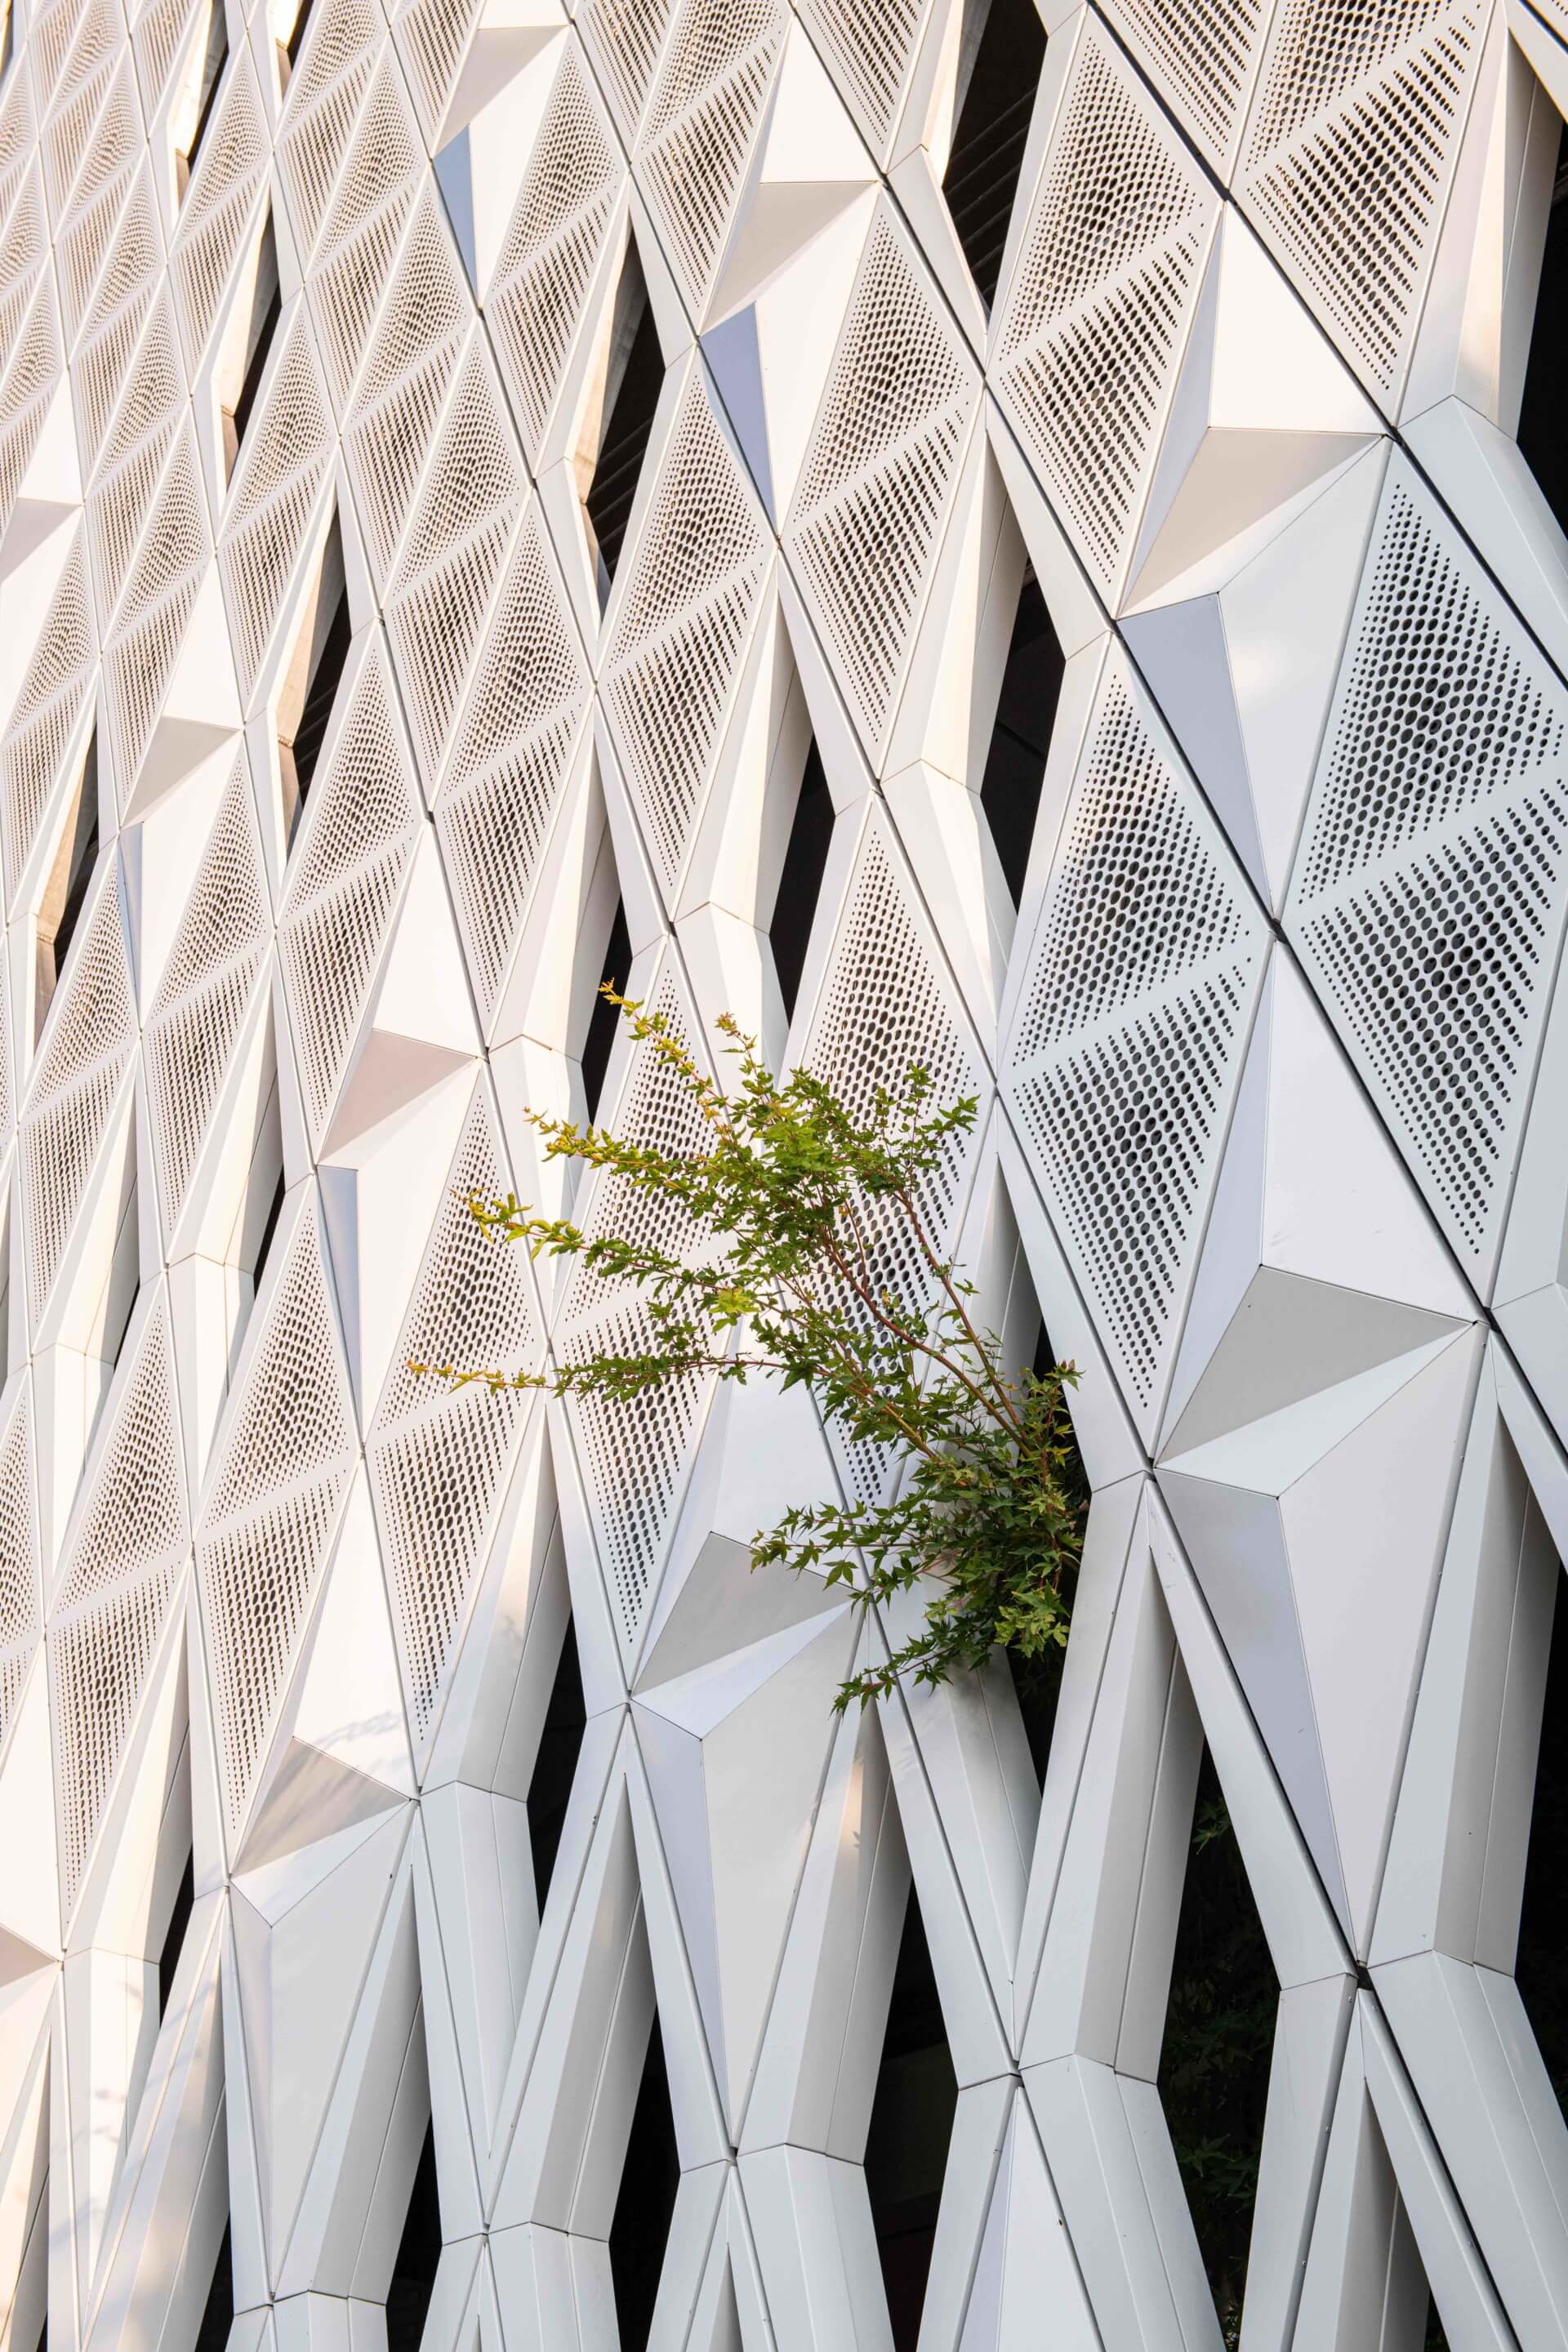 a screen of perforated white aluminum panels